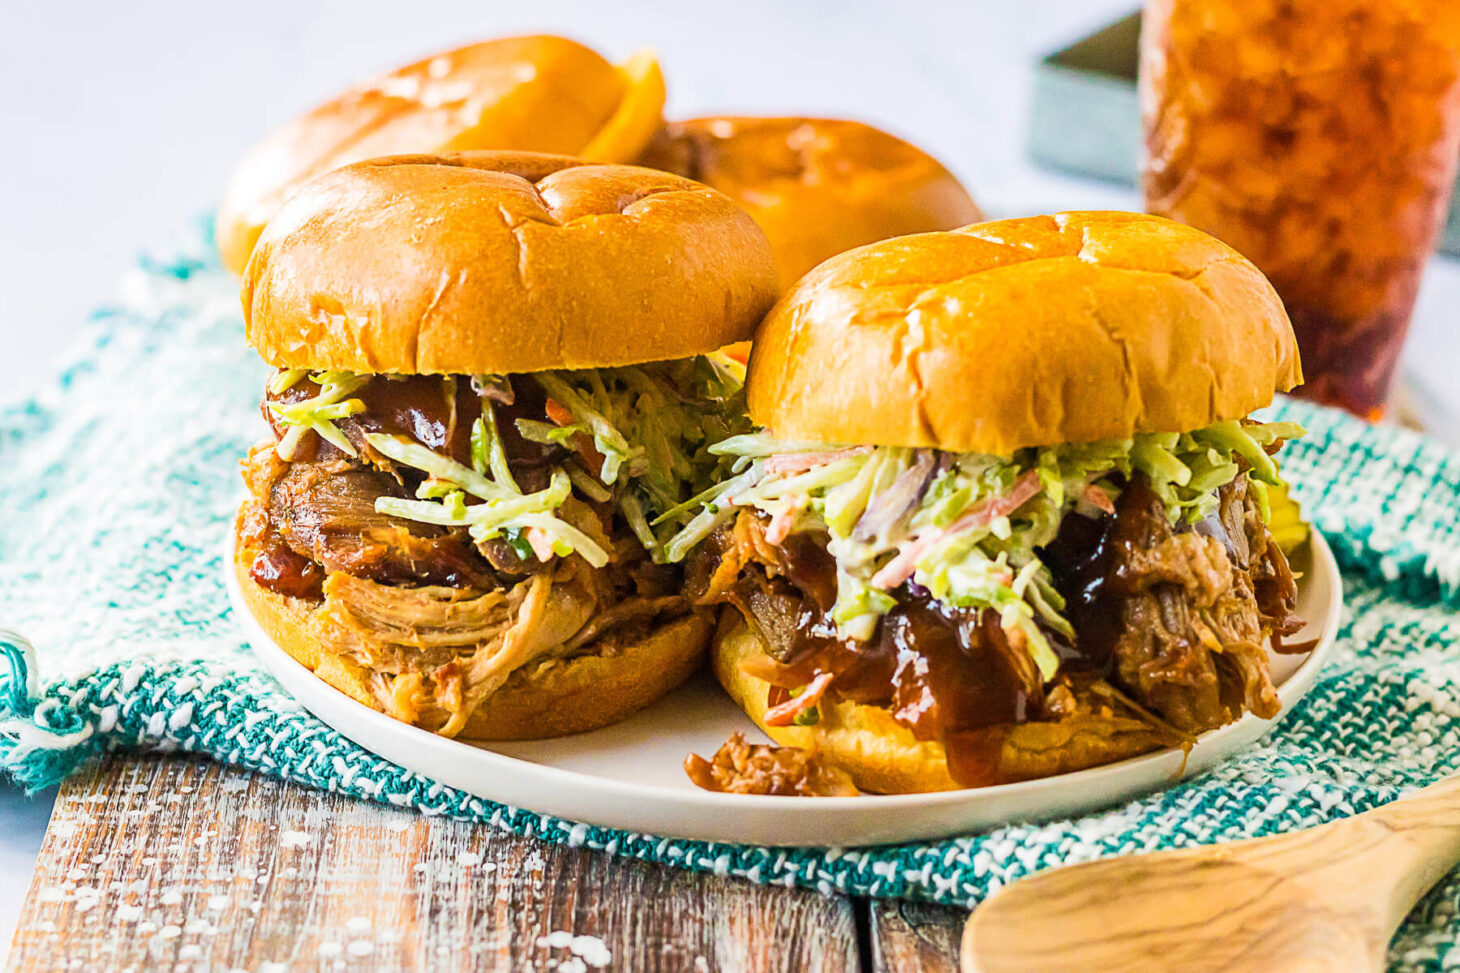 Soft white buns filled with Root Beer Pulled Pork and coleslaw.